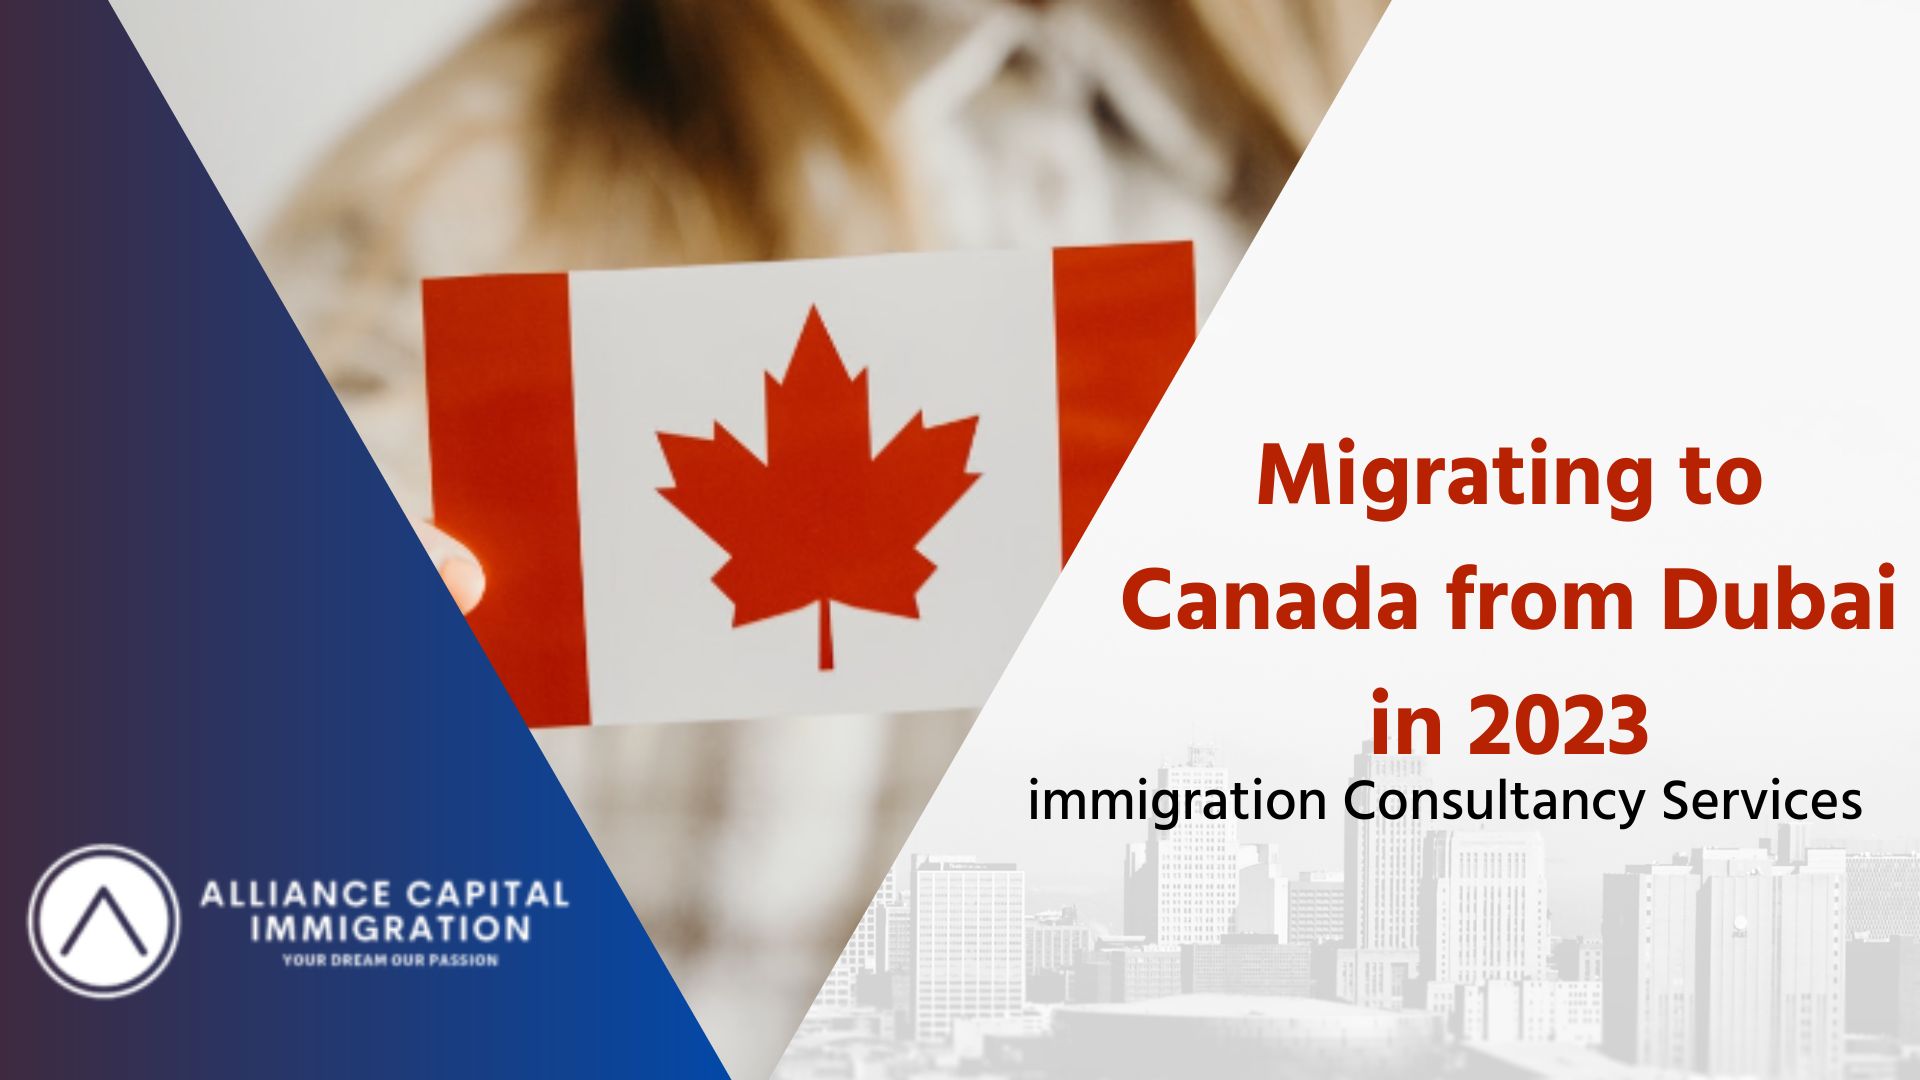 Migrating to Canada from Dubai in 2023